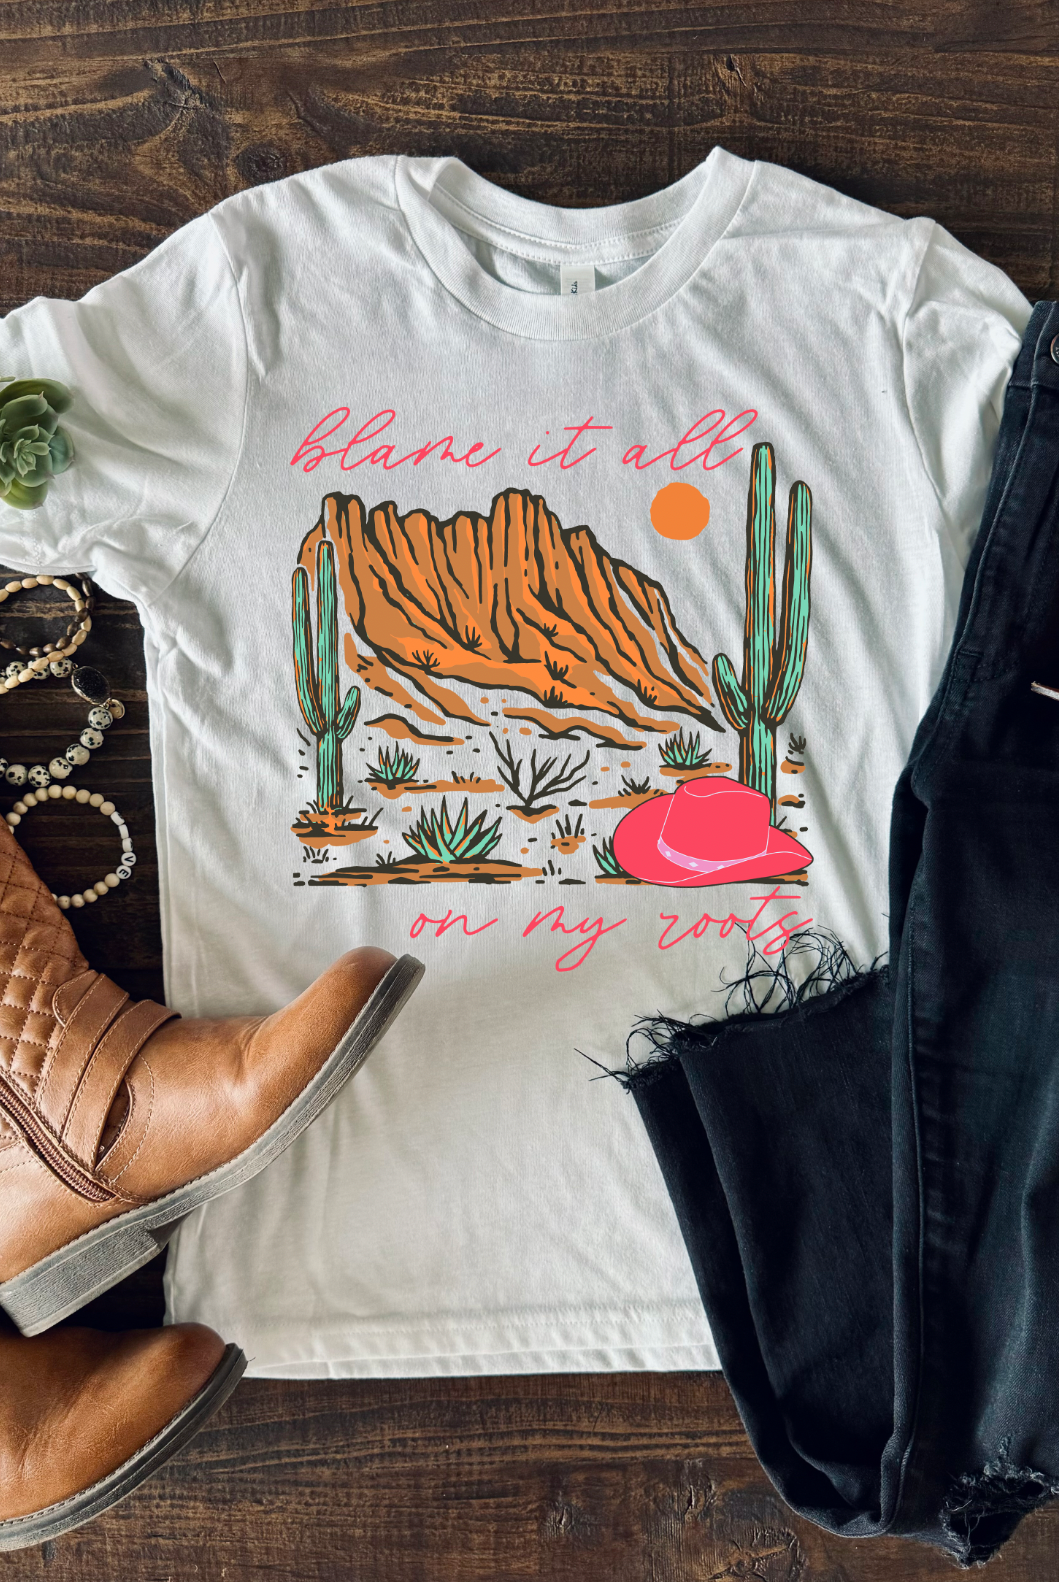 Blame it all on my roots. Bella and Canvas soft tee in White. Hand made and shipped from Texas.